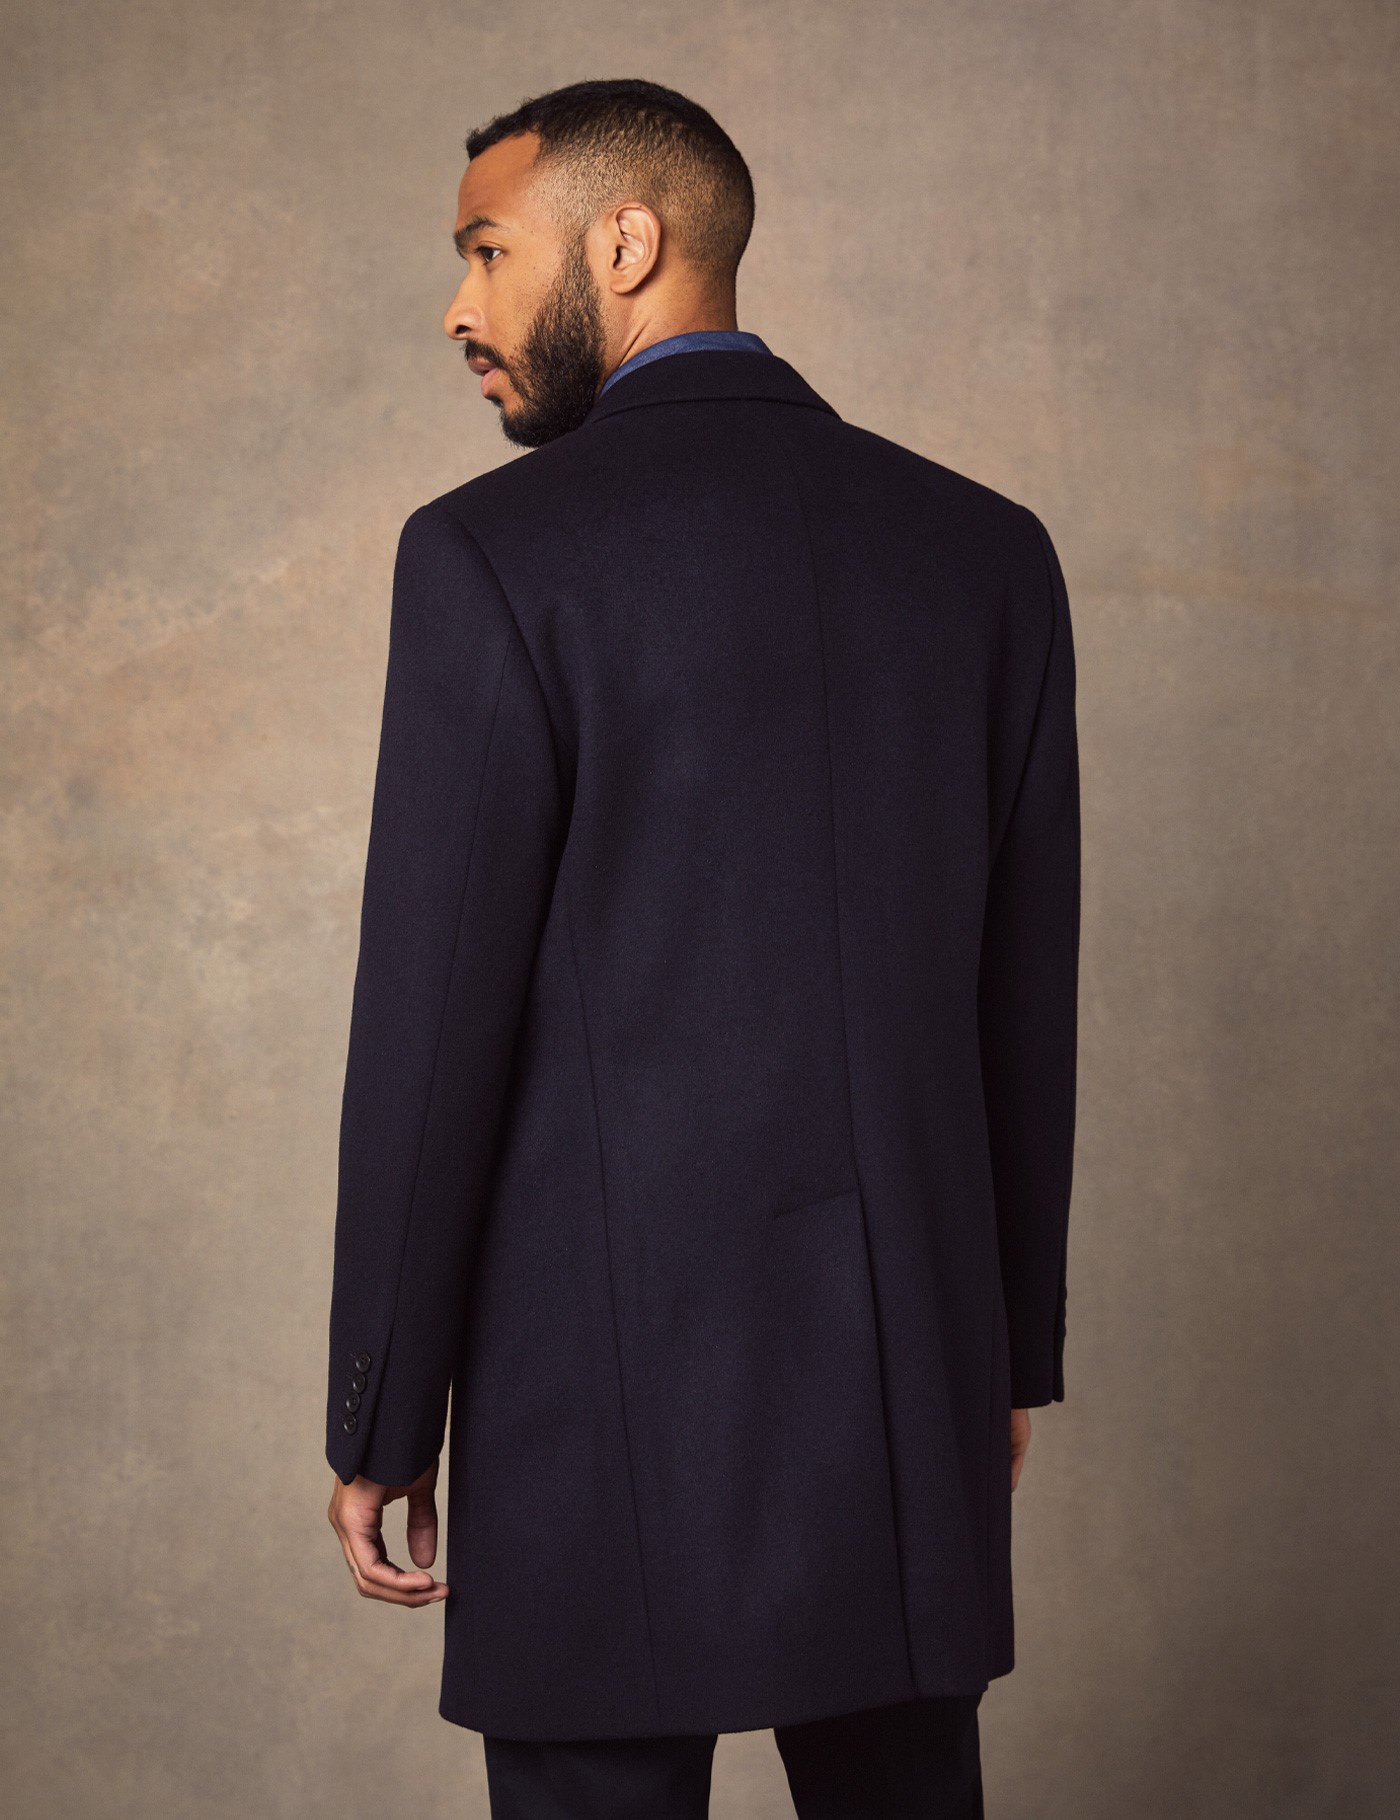 100% Wool Men’s Overcoat with Single Back Vent in Navy | Hawes & Curtis ...